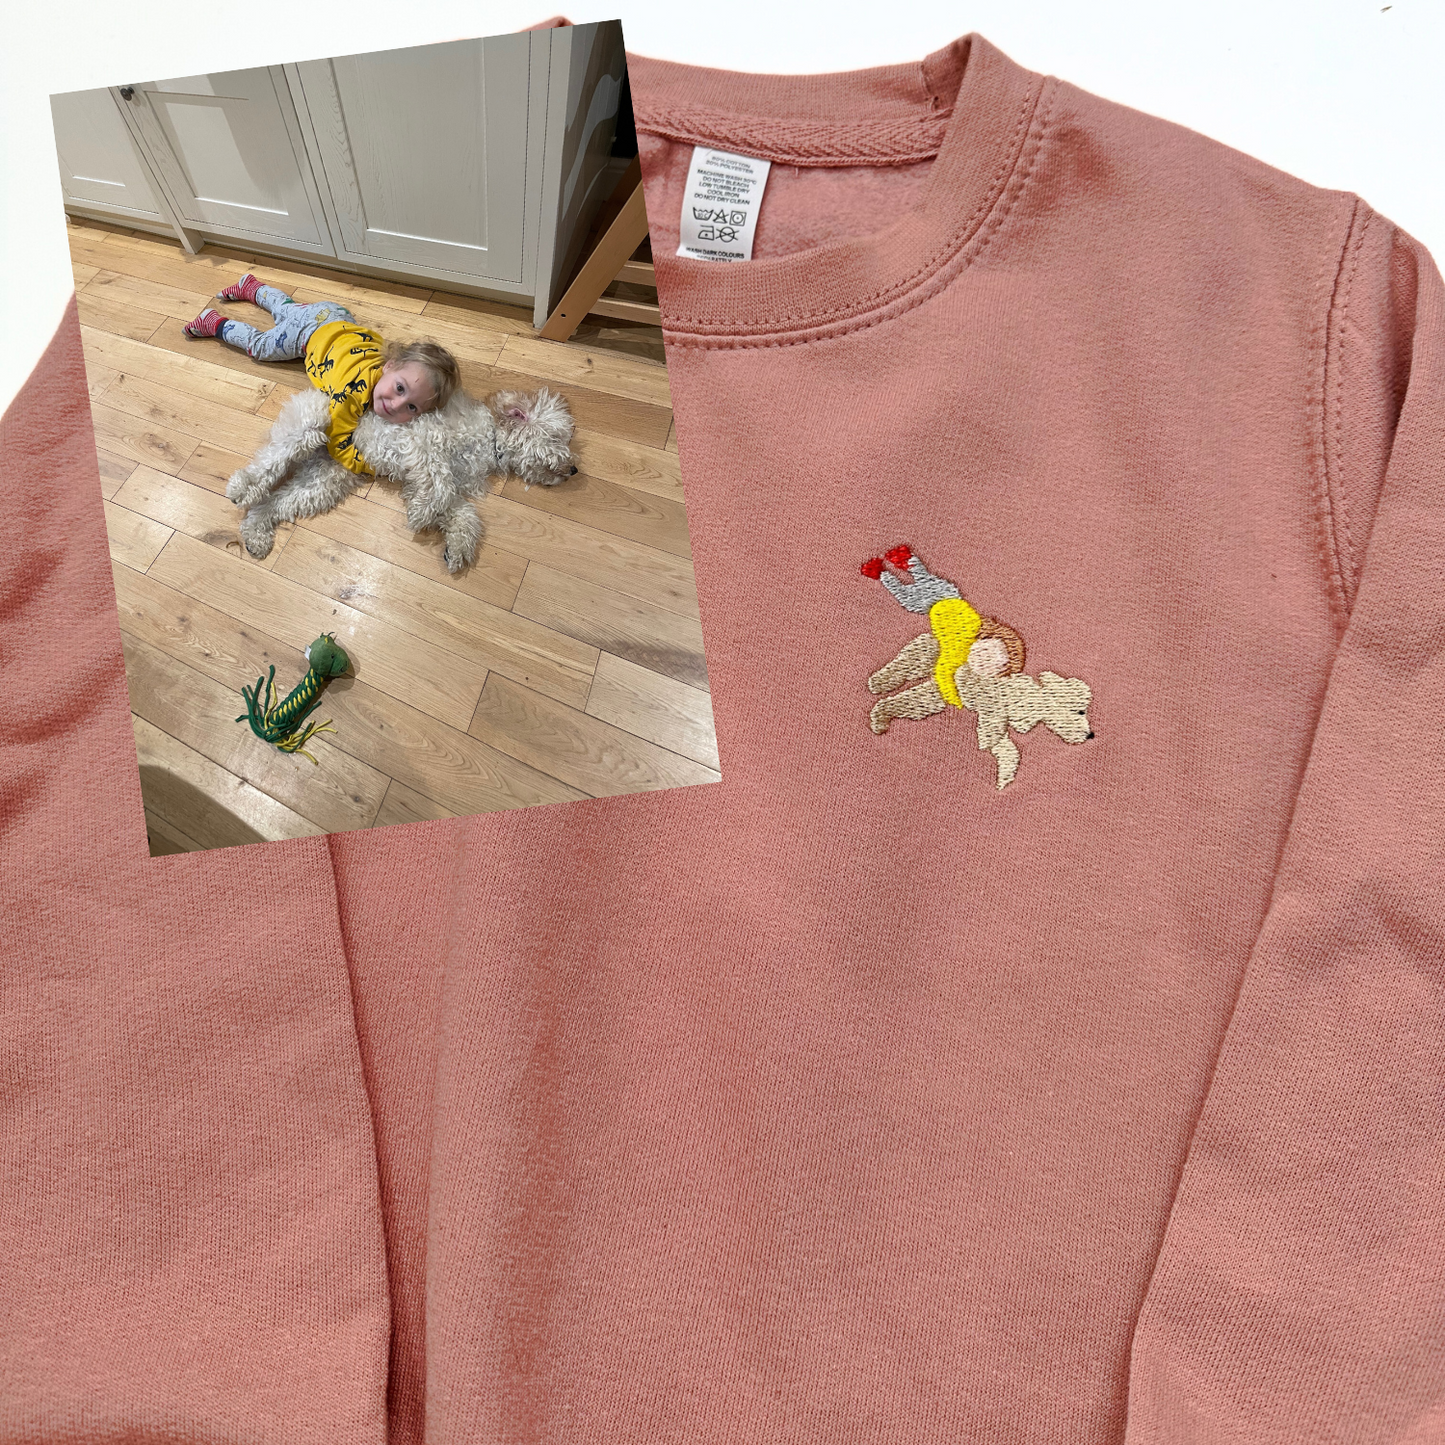 Child's Personalised Sweater with Embroidered Artwork - Upload Your Own Photo and Create a Unique, Customised Sweater for Your Little One! Perfect for Keeping Your Child Warm and Stylish in the Cooler Months. Handcrafted with Love, Featuring Your Special Snapshot Turned into Embroidered Artwork. Order Now and Make Memories Last with Our Customised Children's Sweater!